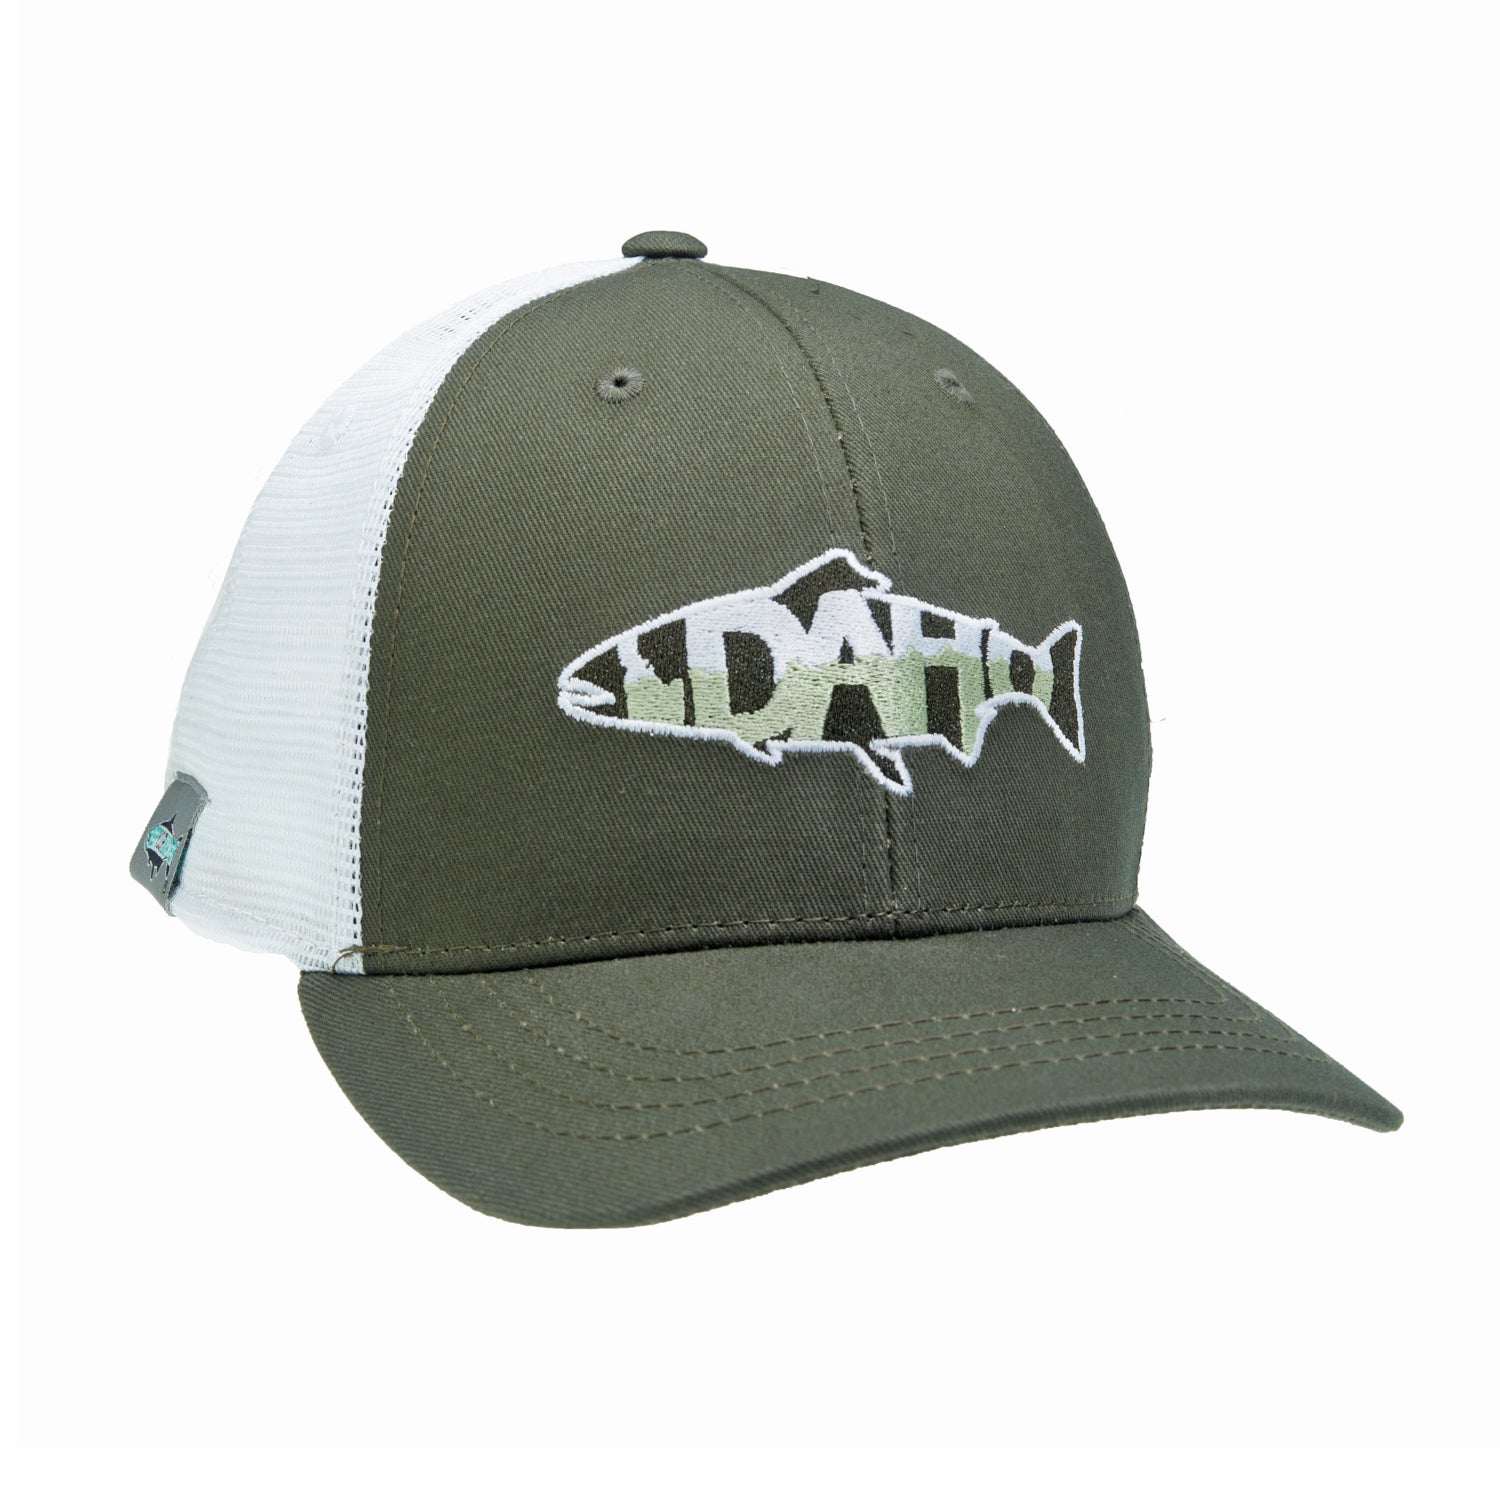 A hat with white mesh in the back and dull green fabric on the front. Embroidered on the front is a trout with the word "IDAHO" inside of it.